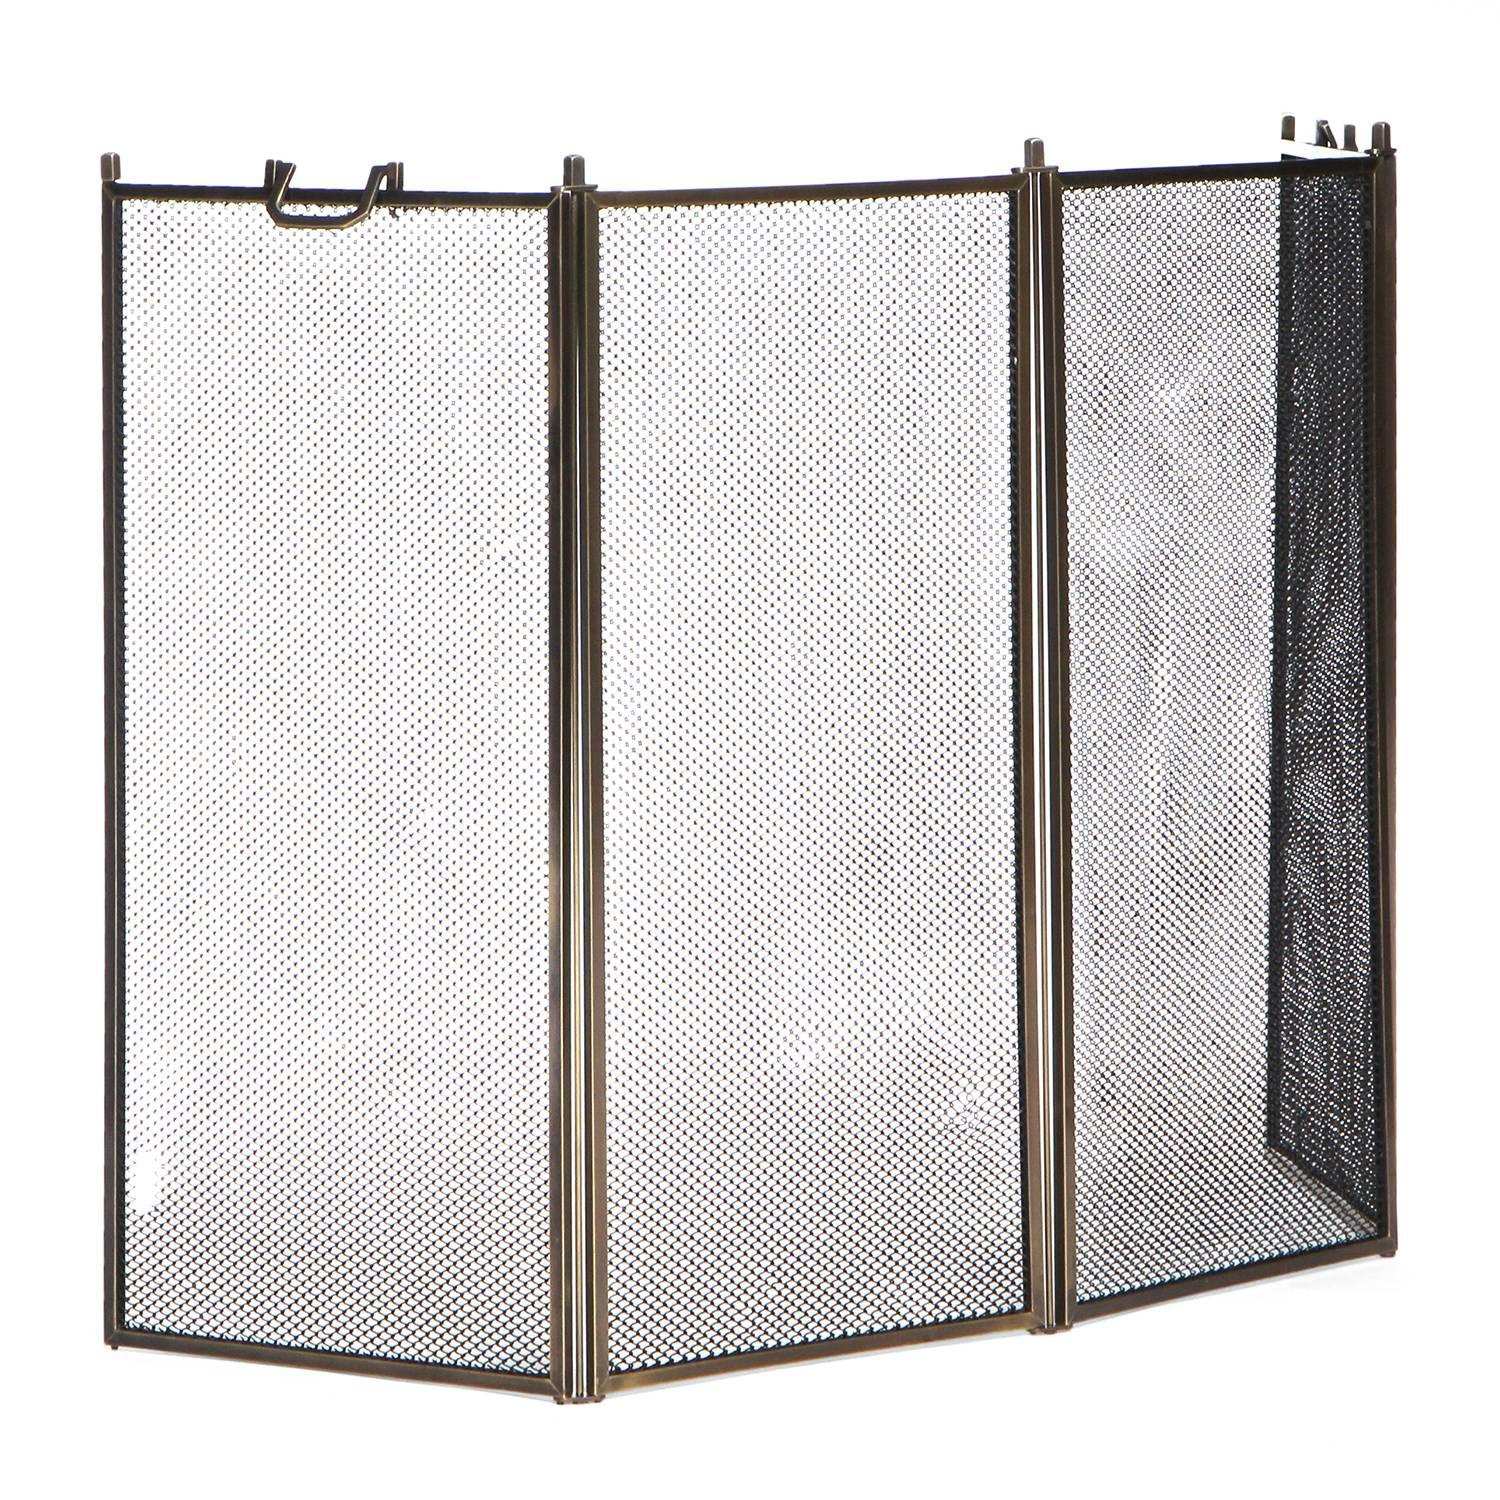 A spare and elegant fire screen having four hinged sections well-crafted of square-gauge brass and patinated steel mesh.